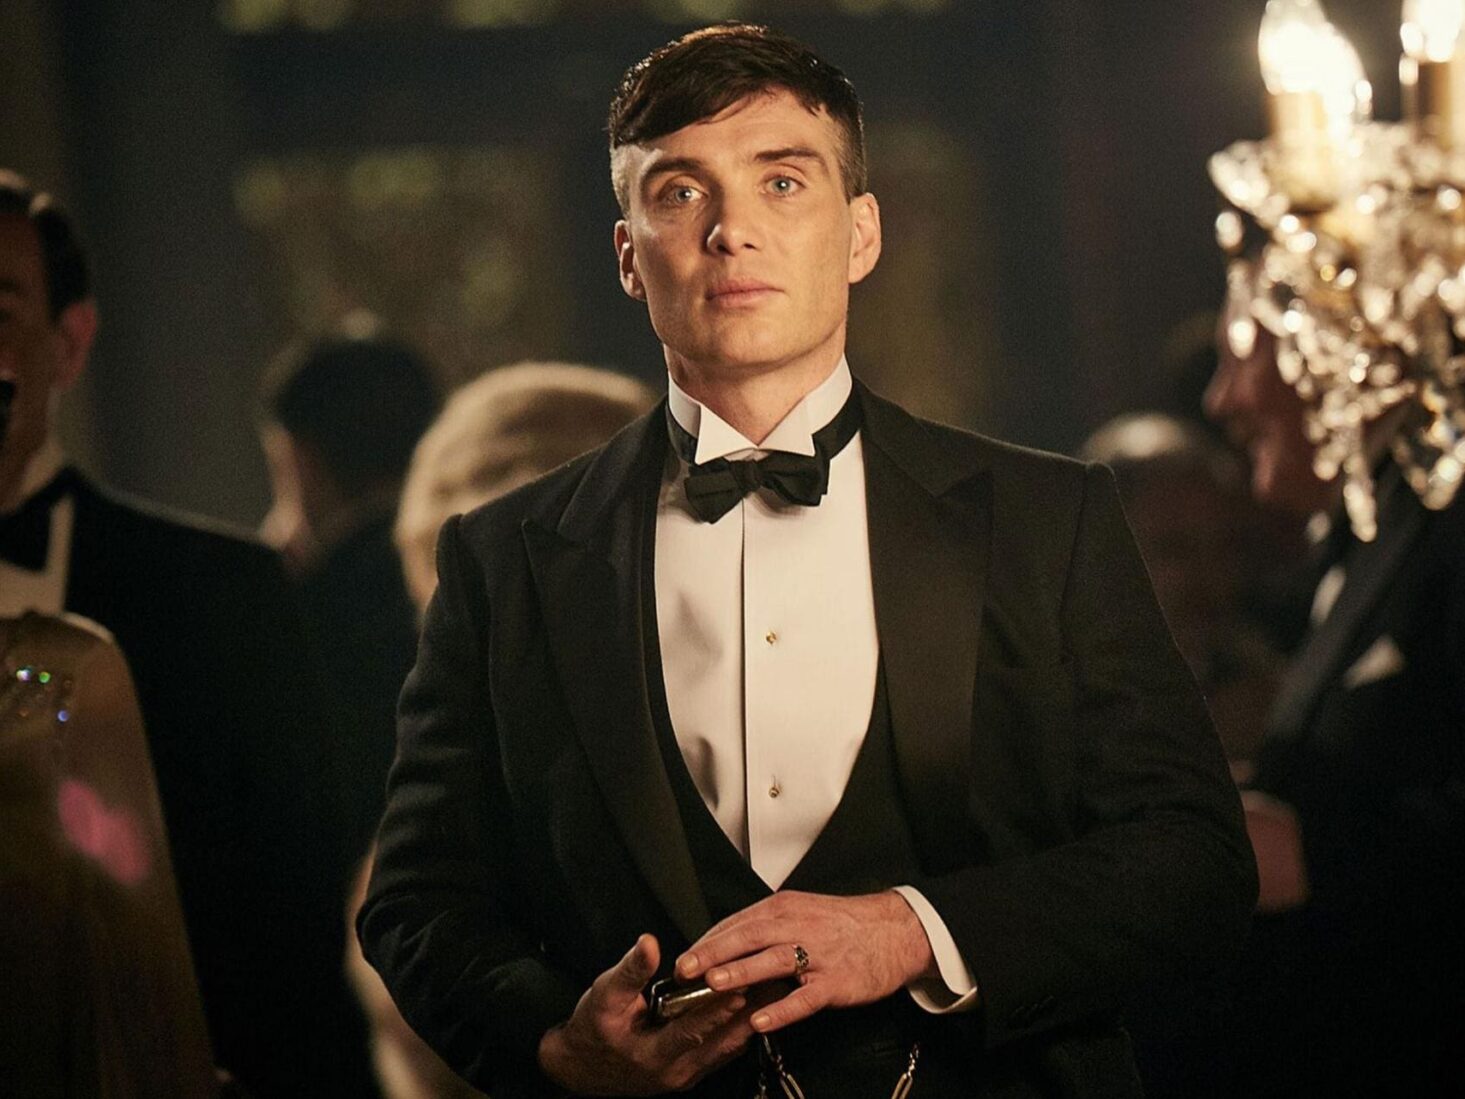 exclusive interview with Cillian Murphy